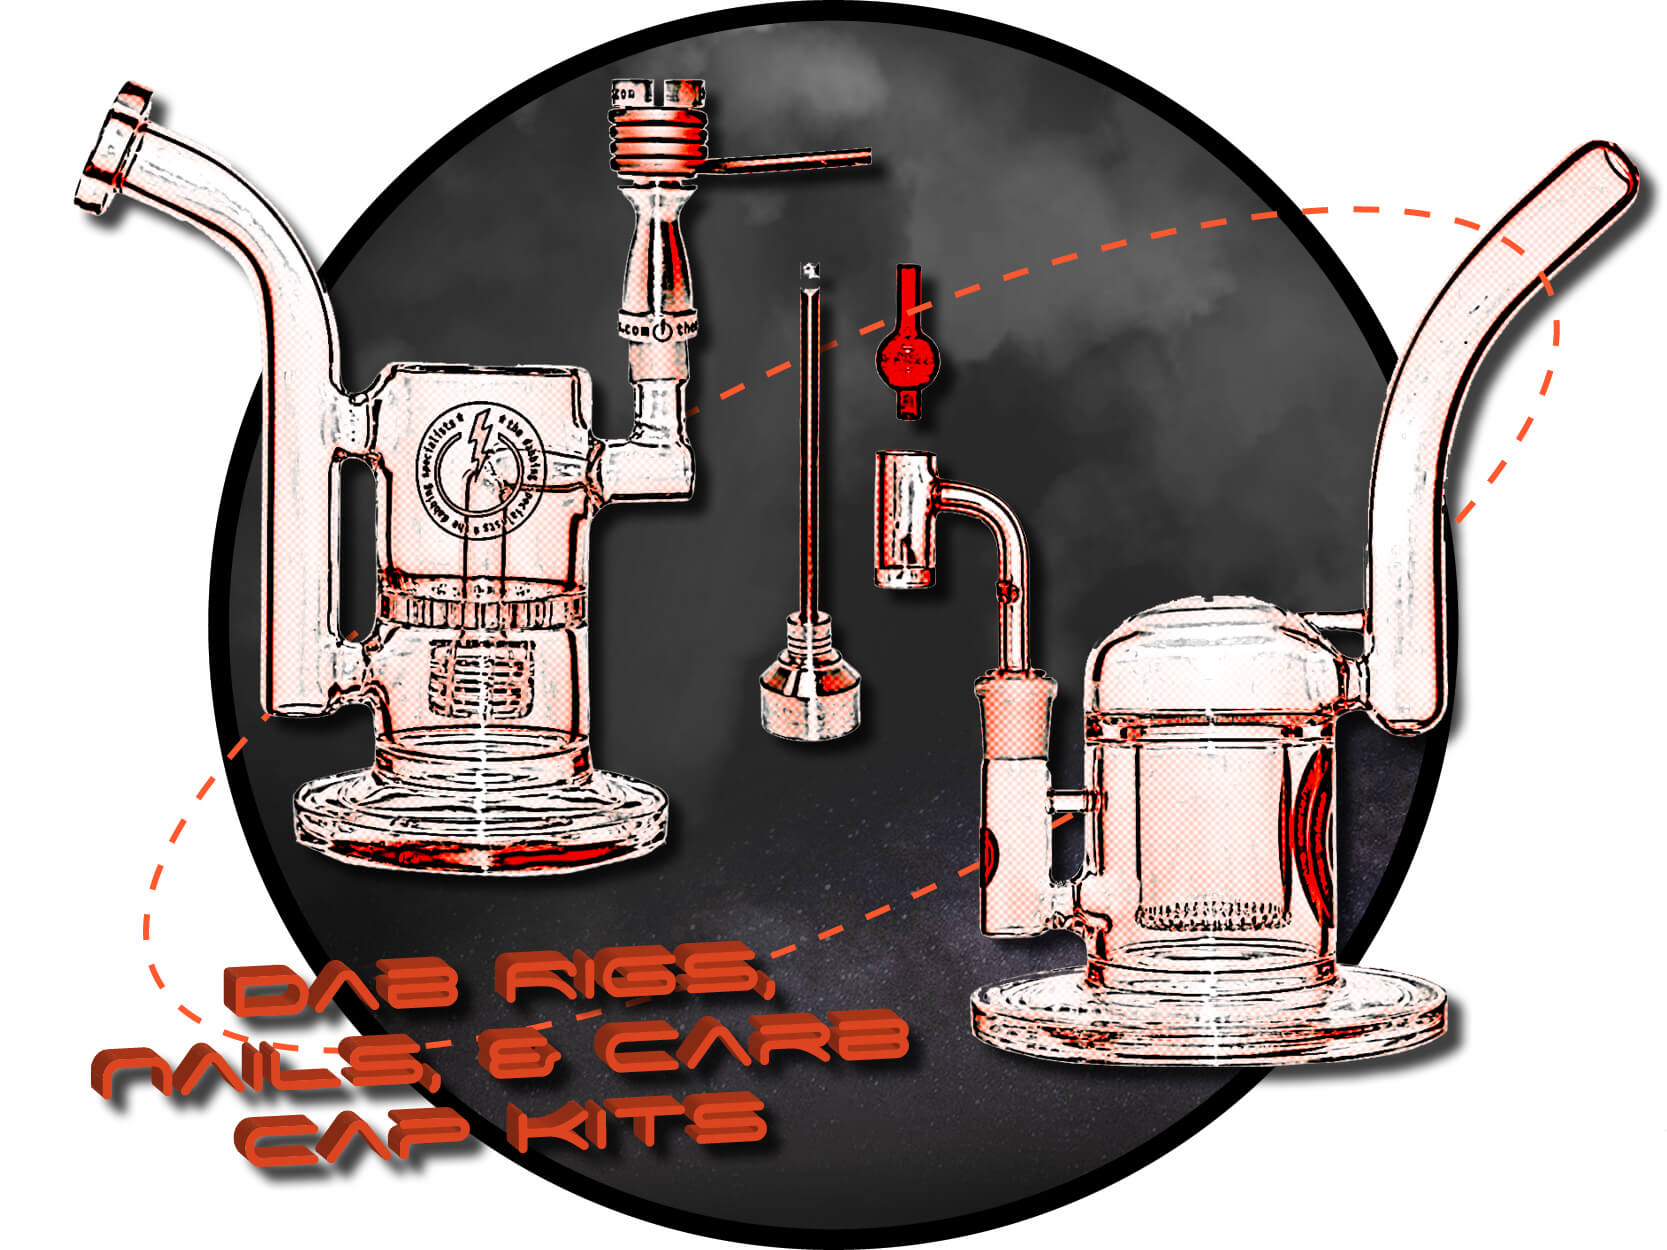 TDS Dab Rig, Nails, & Carb Cap Kits Product Collection Image